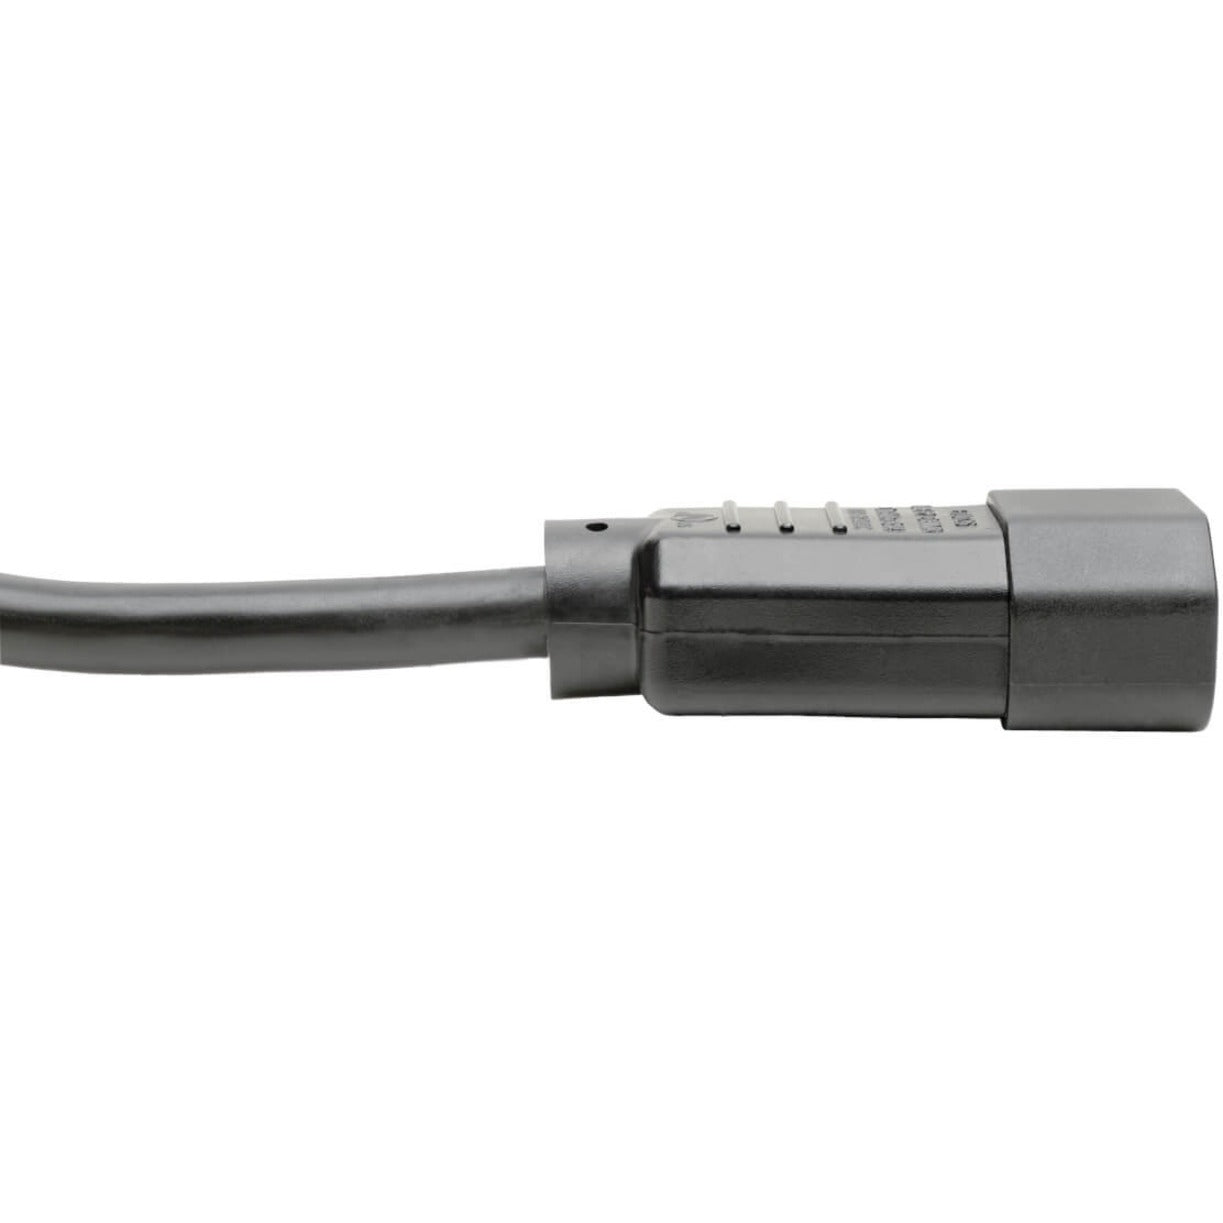 Tripp Lite P005-010 Power Interconnect Cable, 10 ft, 15A 250V AC